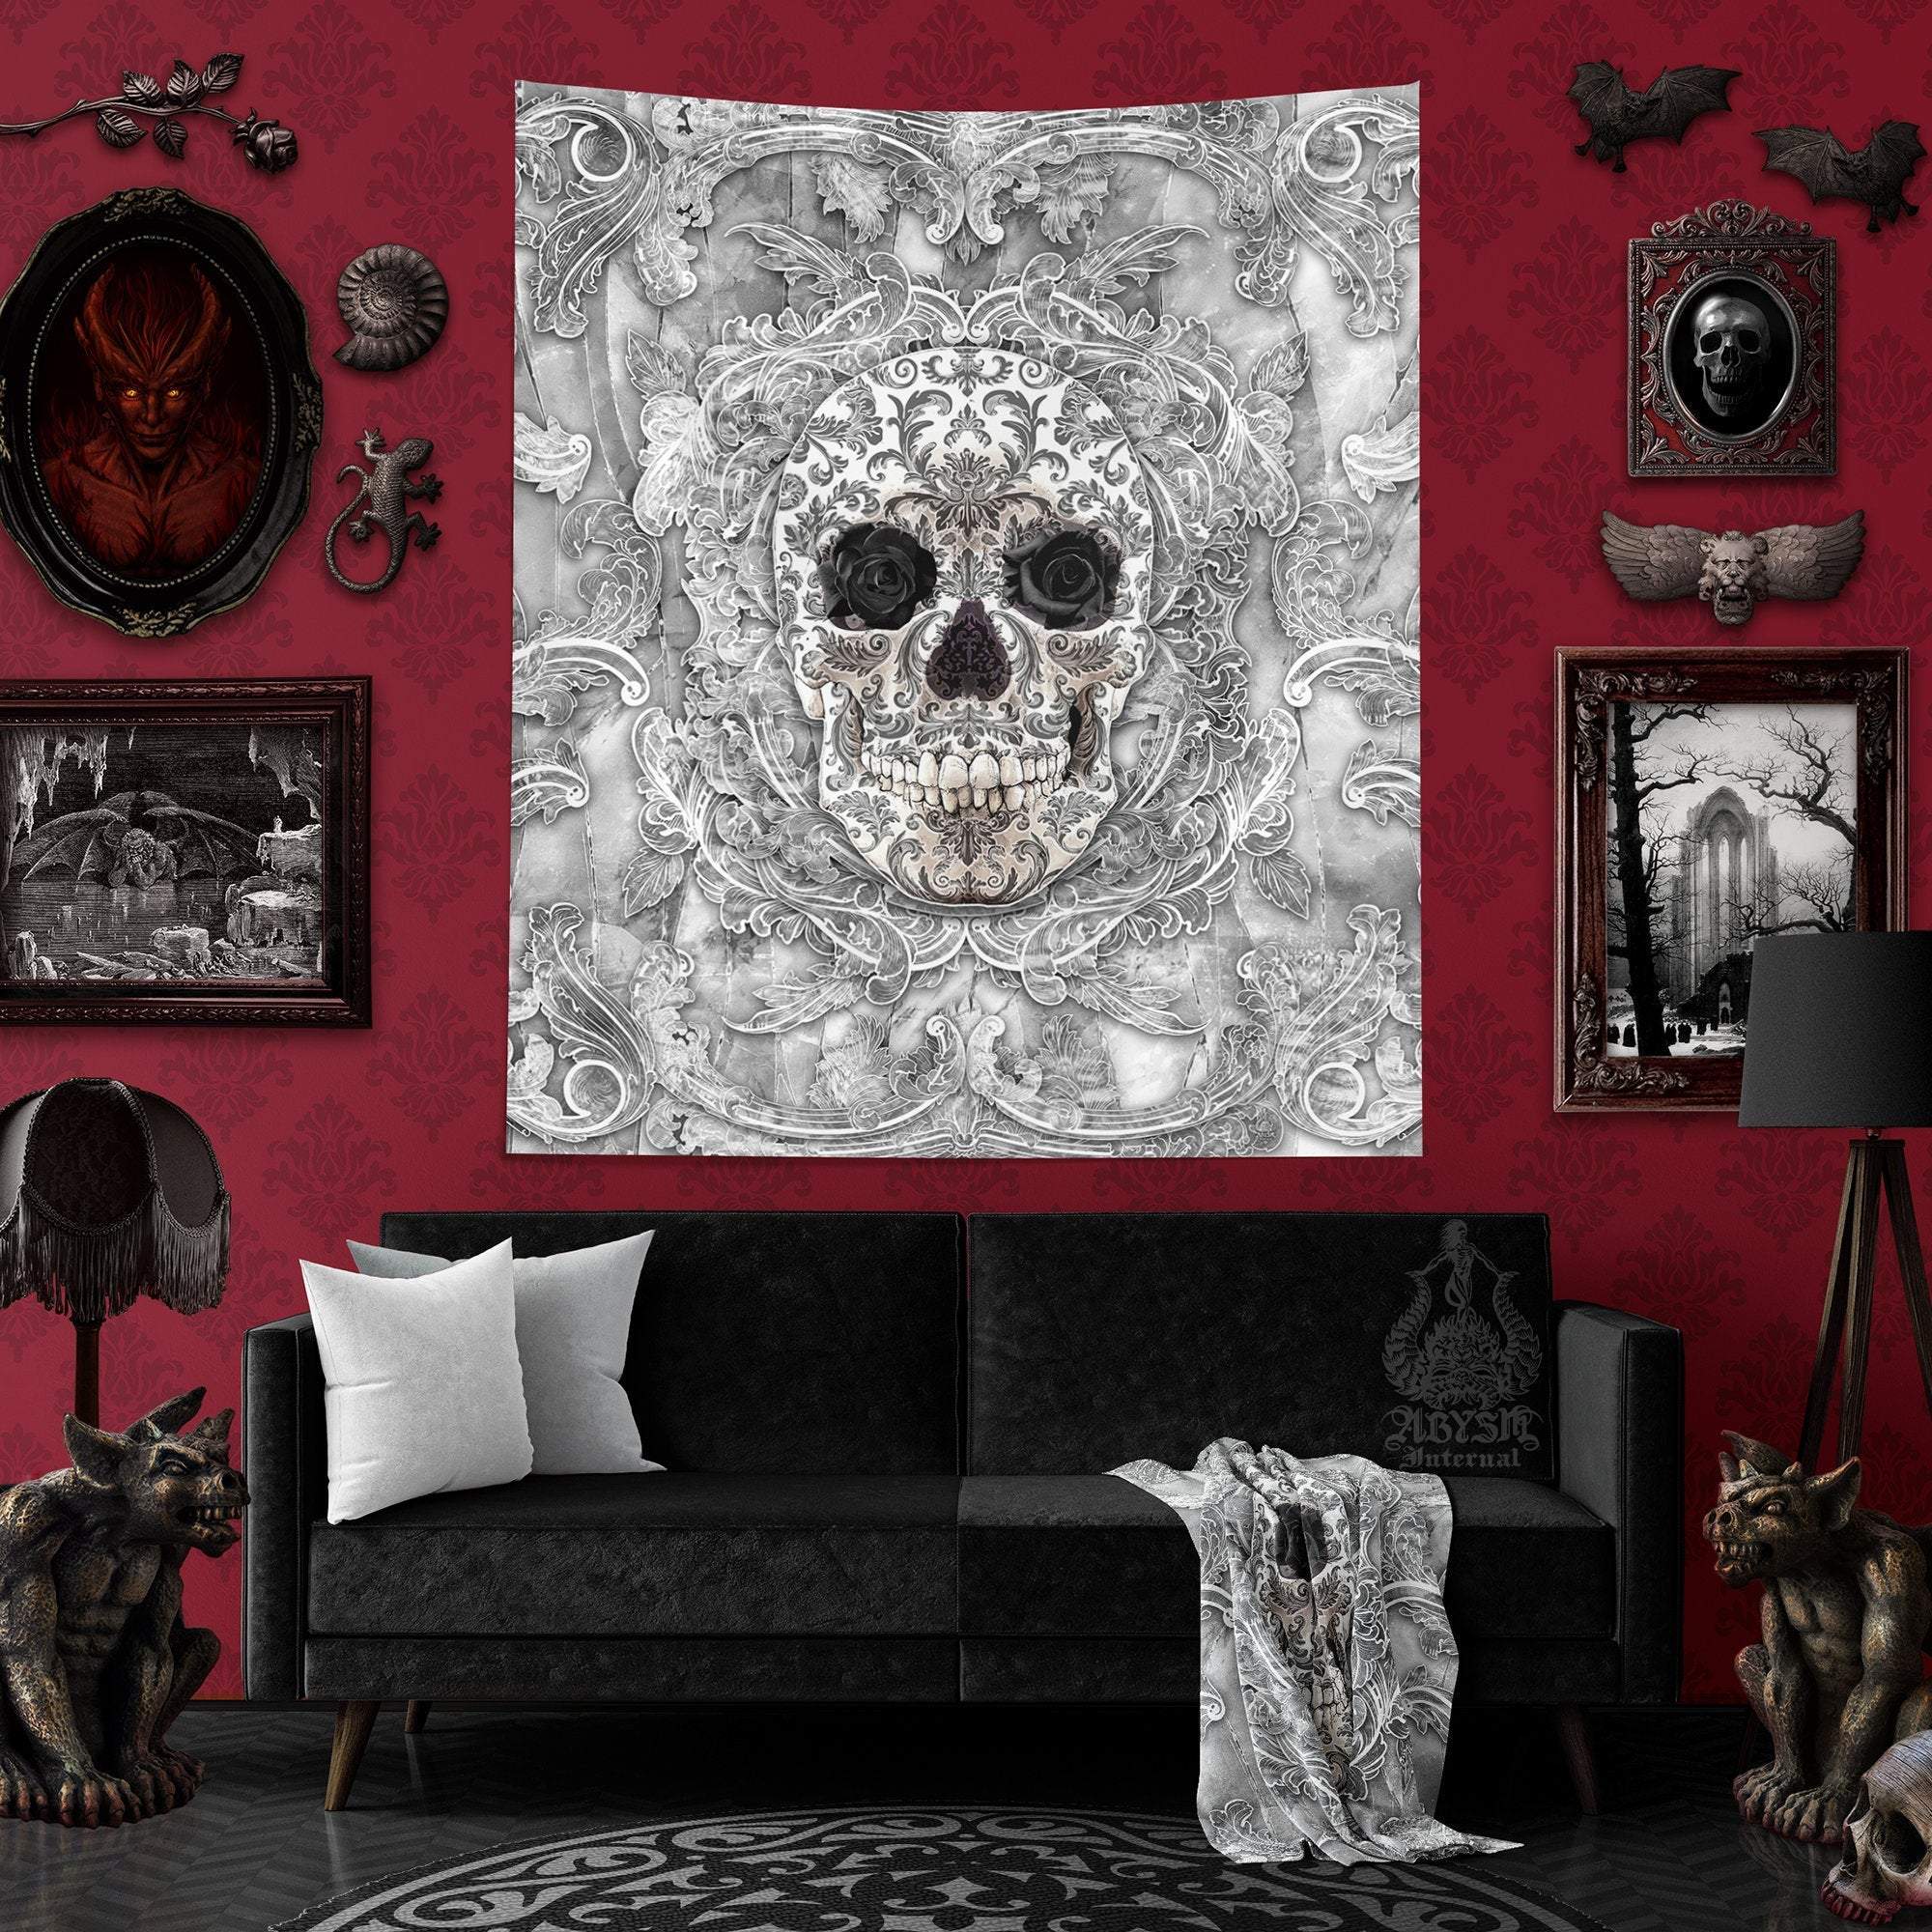 White Goth Tapestry, Gothic Skull Wall Hanging, Macabre Home Decor, Art Print - Stone, Black Roses - Abysm Internal